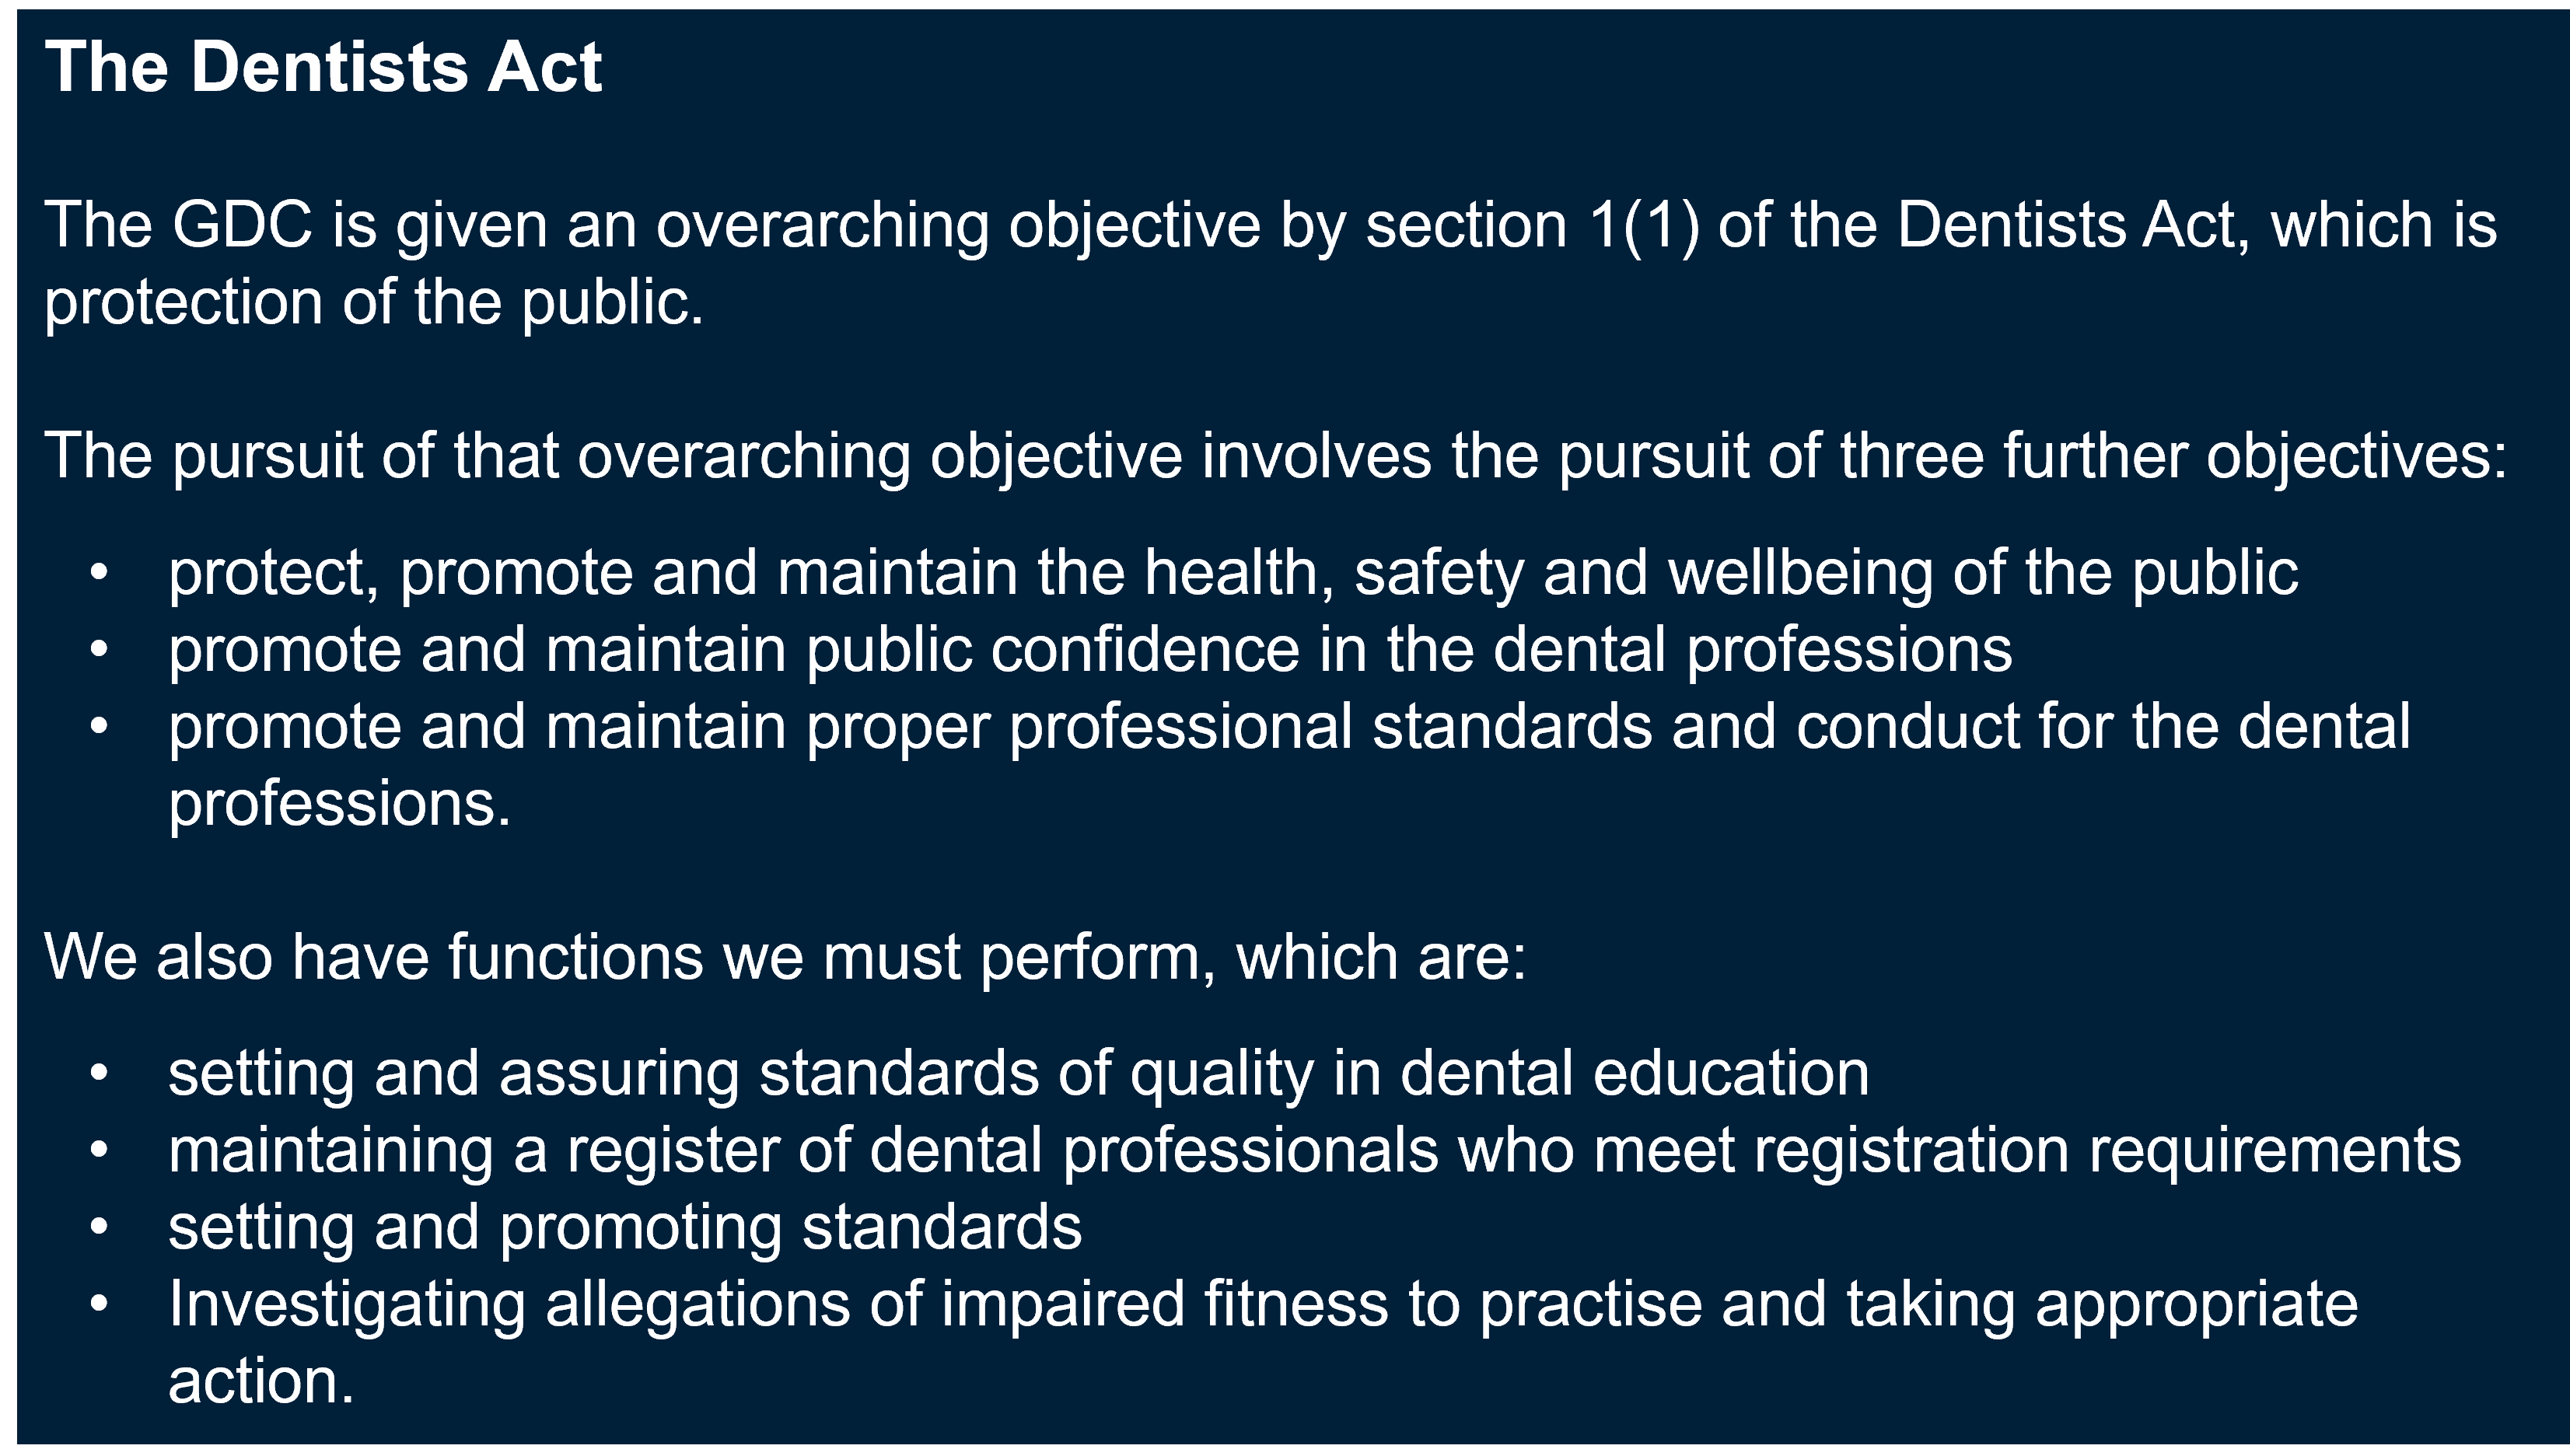 Setting out section 1 of the Dentists Act 1984 as amended, the statutory objectives of the General Dental Council